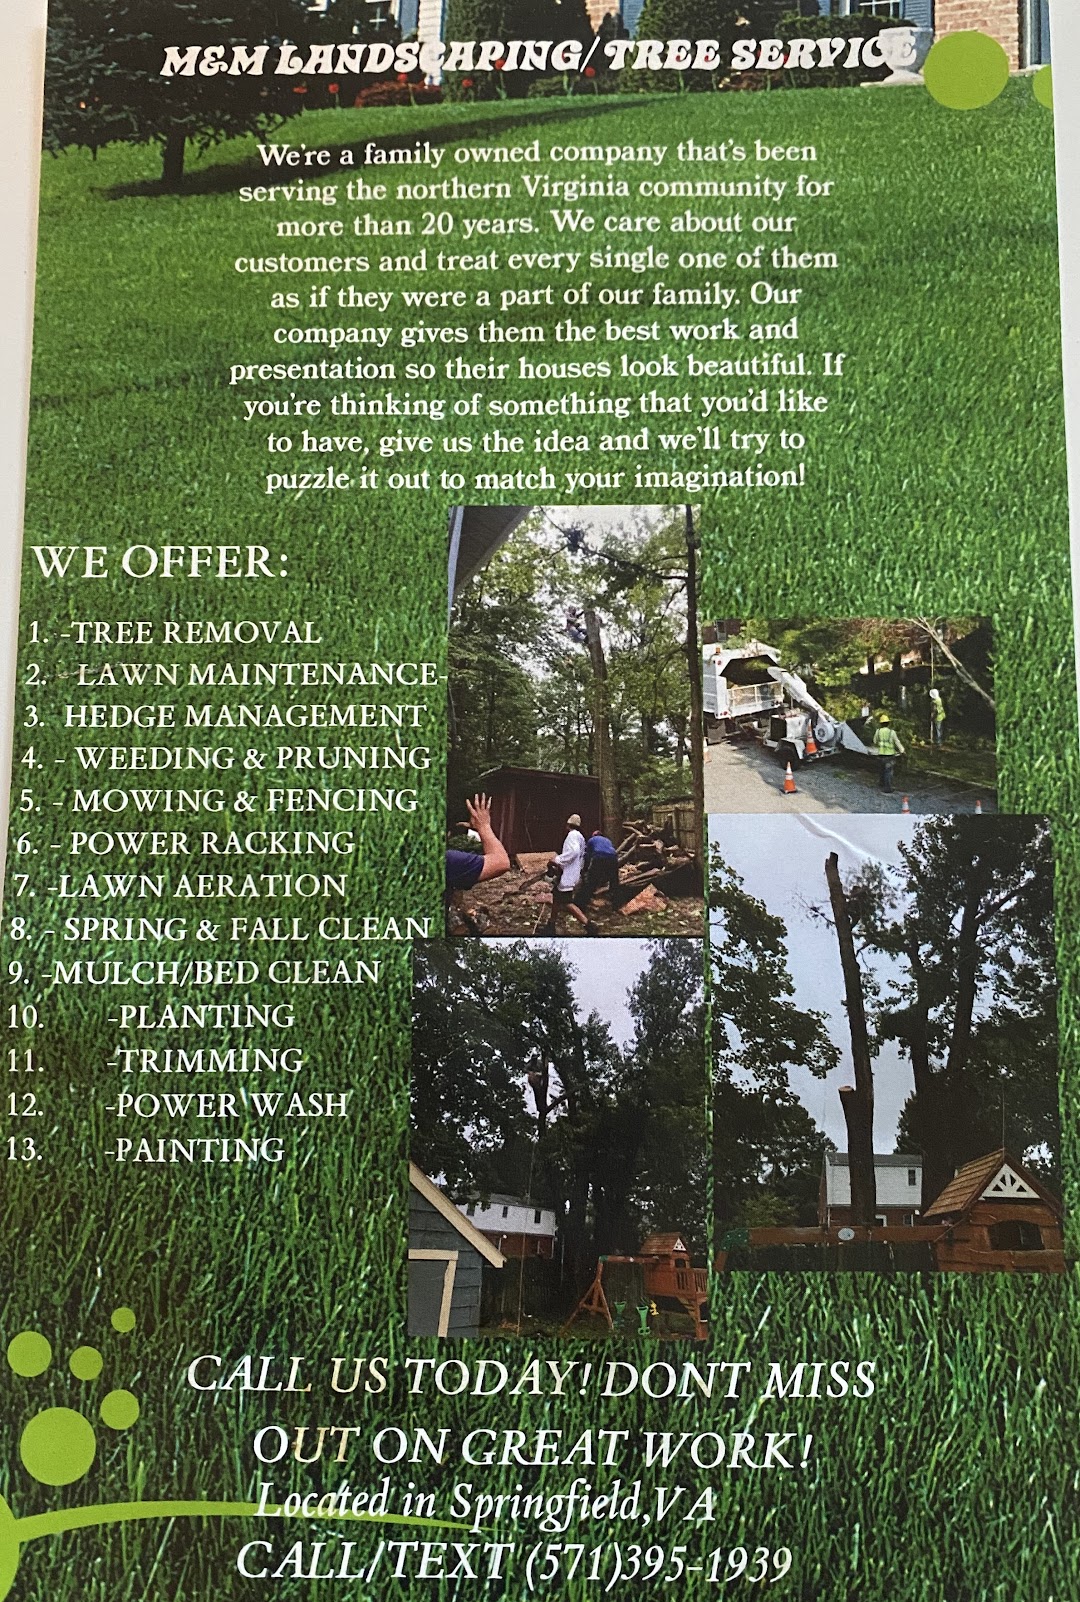 M&M Landscaping and Tree Service